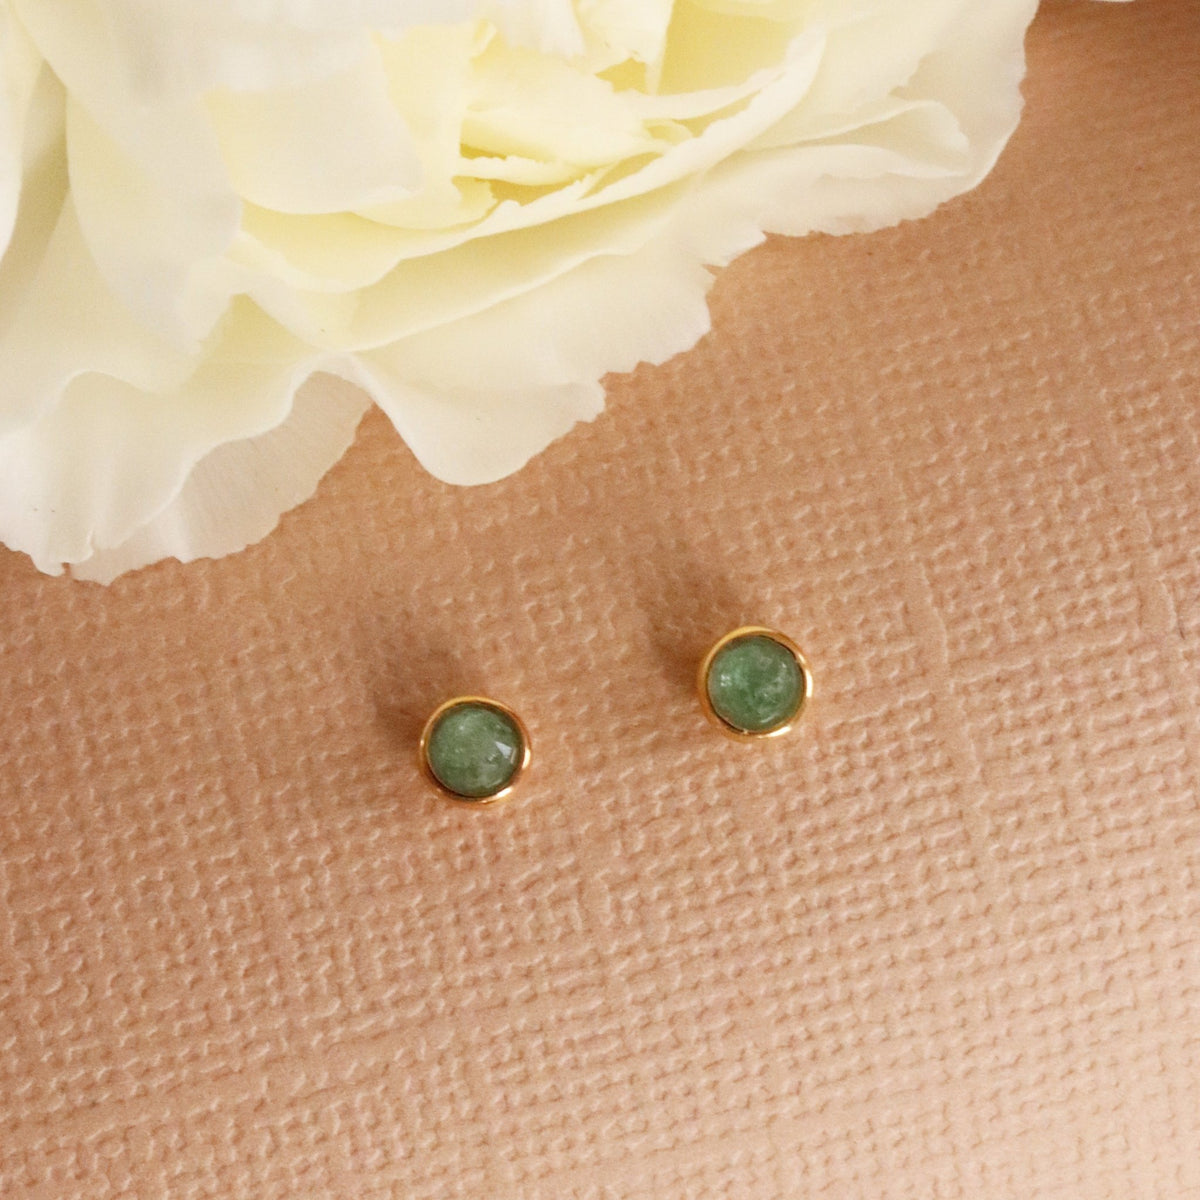 TINY PROTECT STUD EARRINGS - GREEN ONYX &amp; GOLD - SO PRETTY CARA COTTER